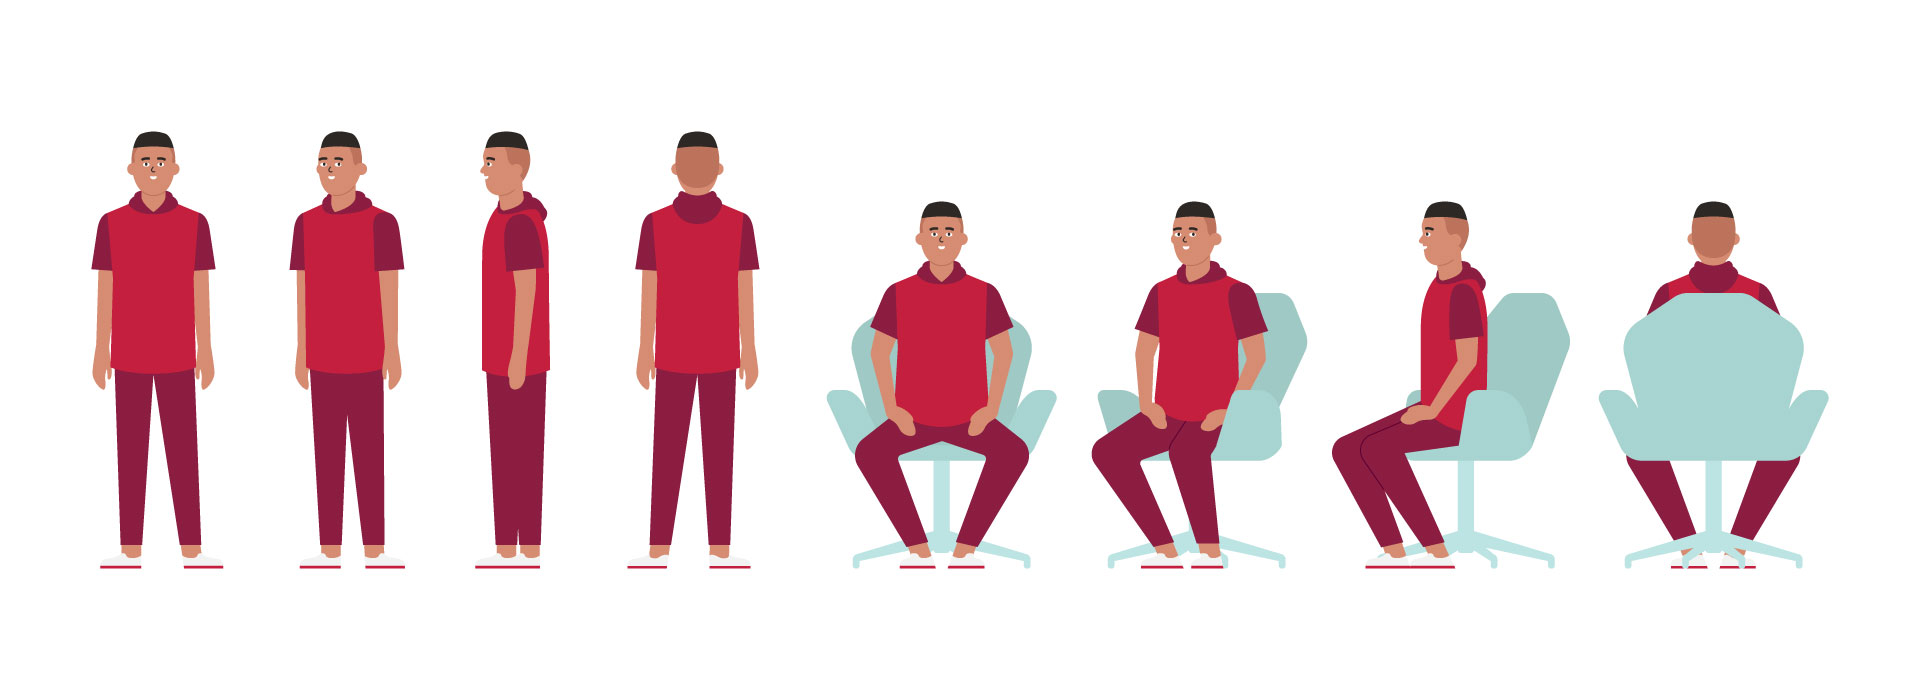 Vector illustration of a character in several views for the CIBC communications